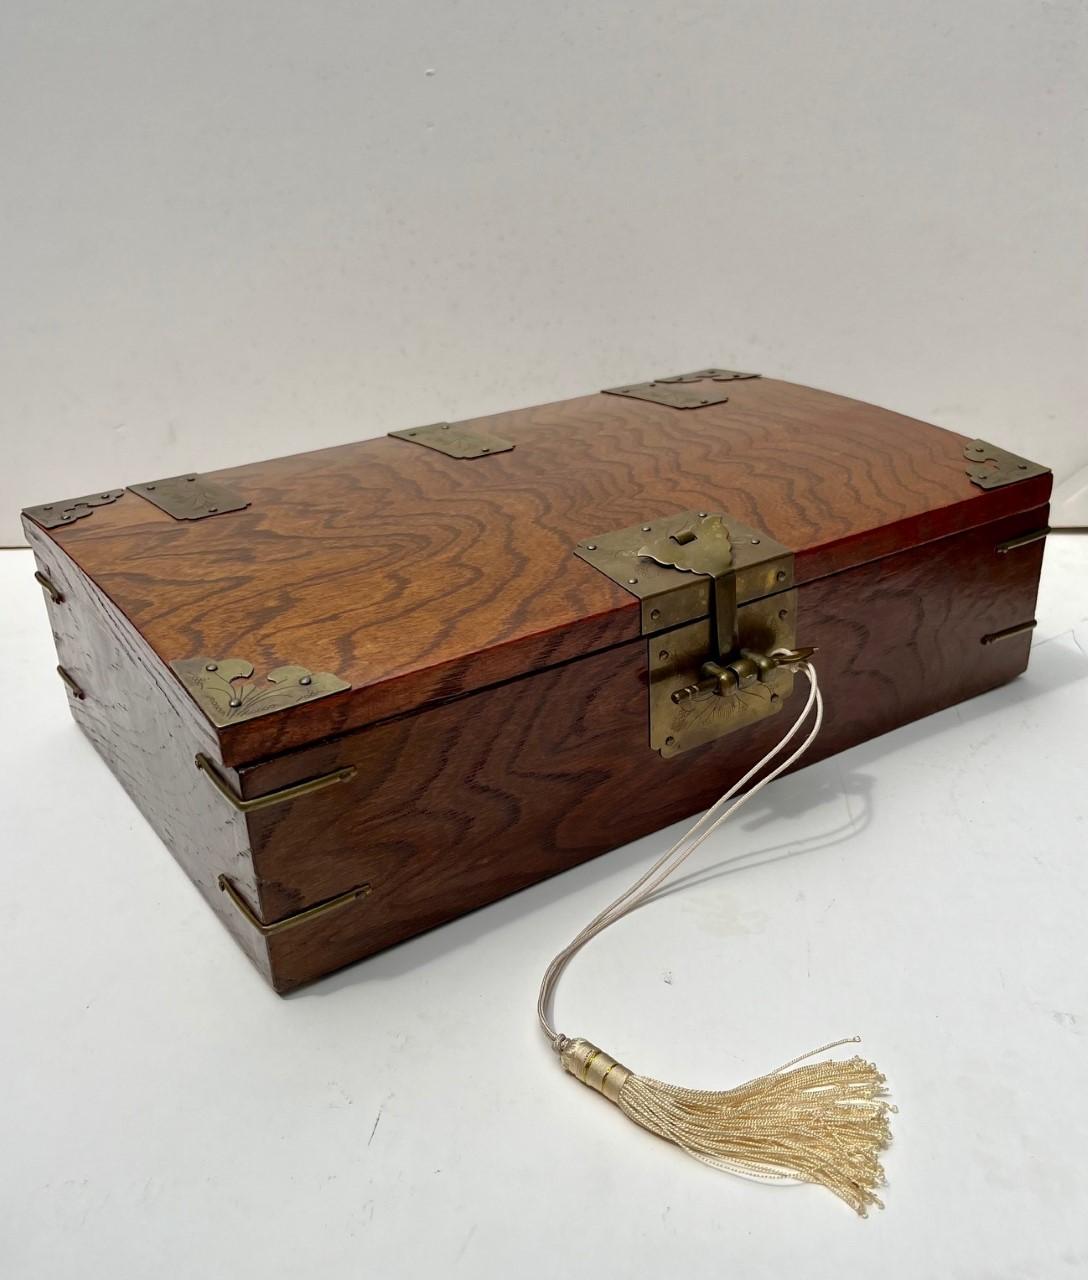 An antique Korean wooden document box from the late 19th century. These hand-crafted valuables box, with Manchurian influence, has a strong and beautiful patterned wood grain and extensive decorative and structural cut brass hardware elements. The